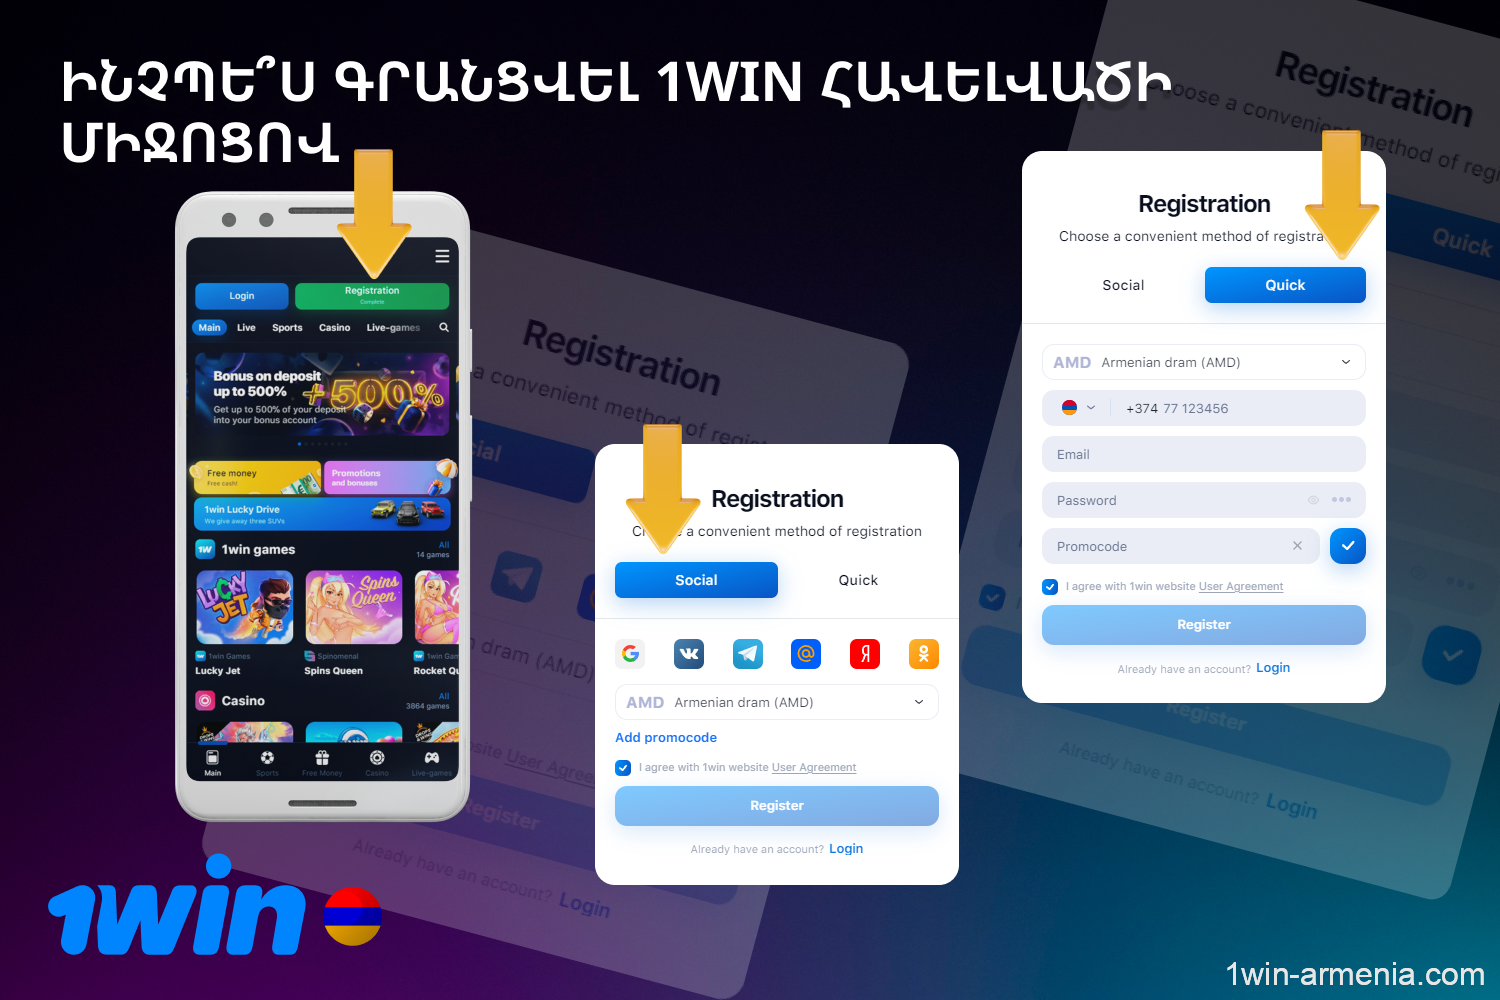 Before using the 1win app, Armenian players must create a gaming profile